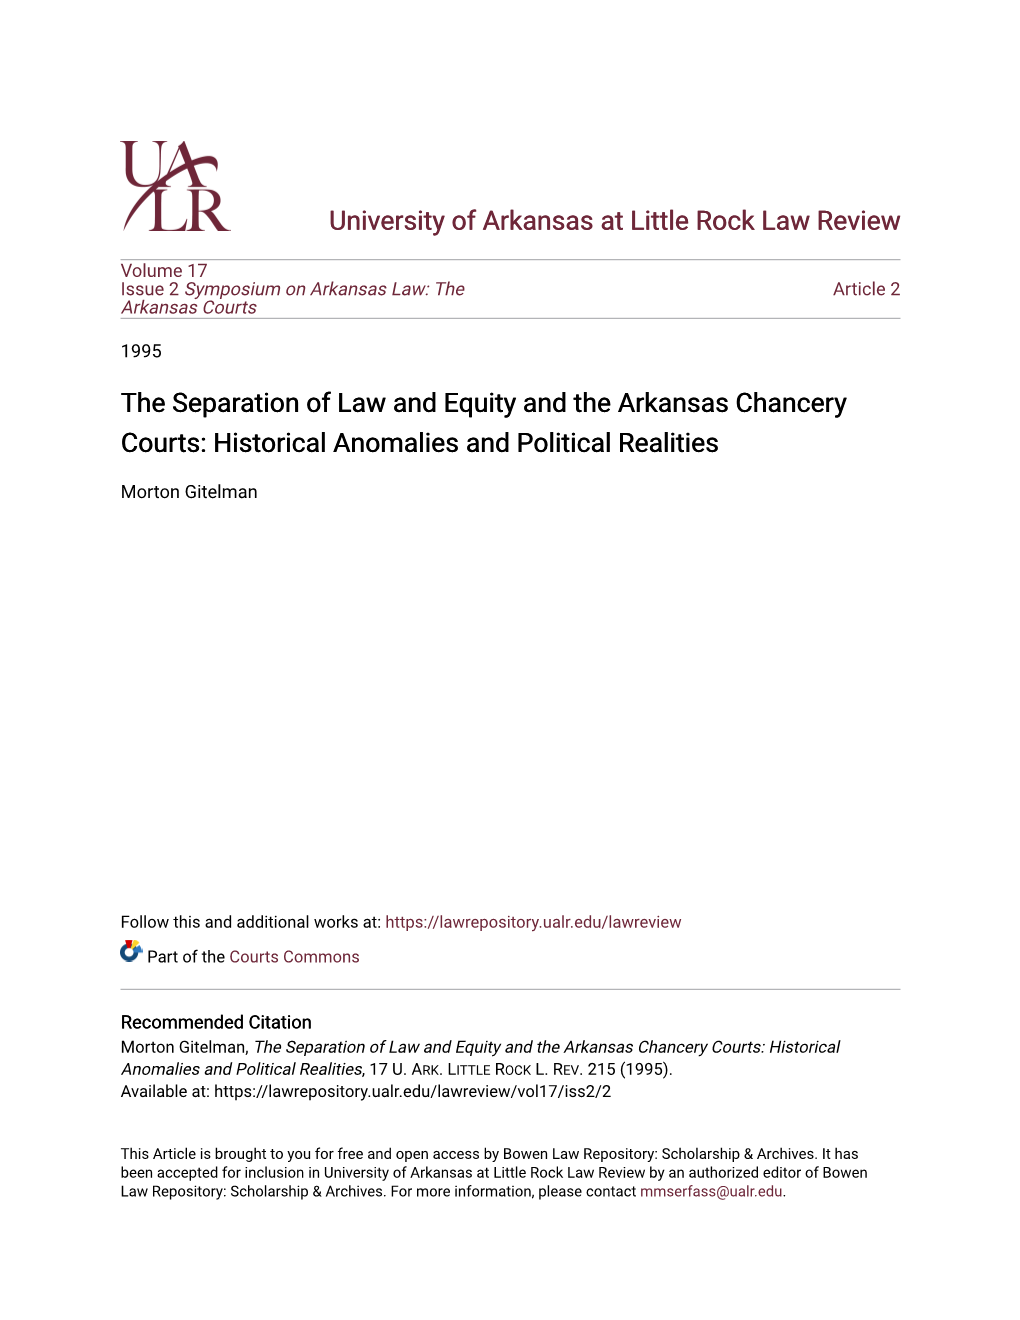 The Separation of Law and Equity and the Arkansas Chancery Courts: Historical Anomalies and Political Realities